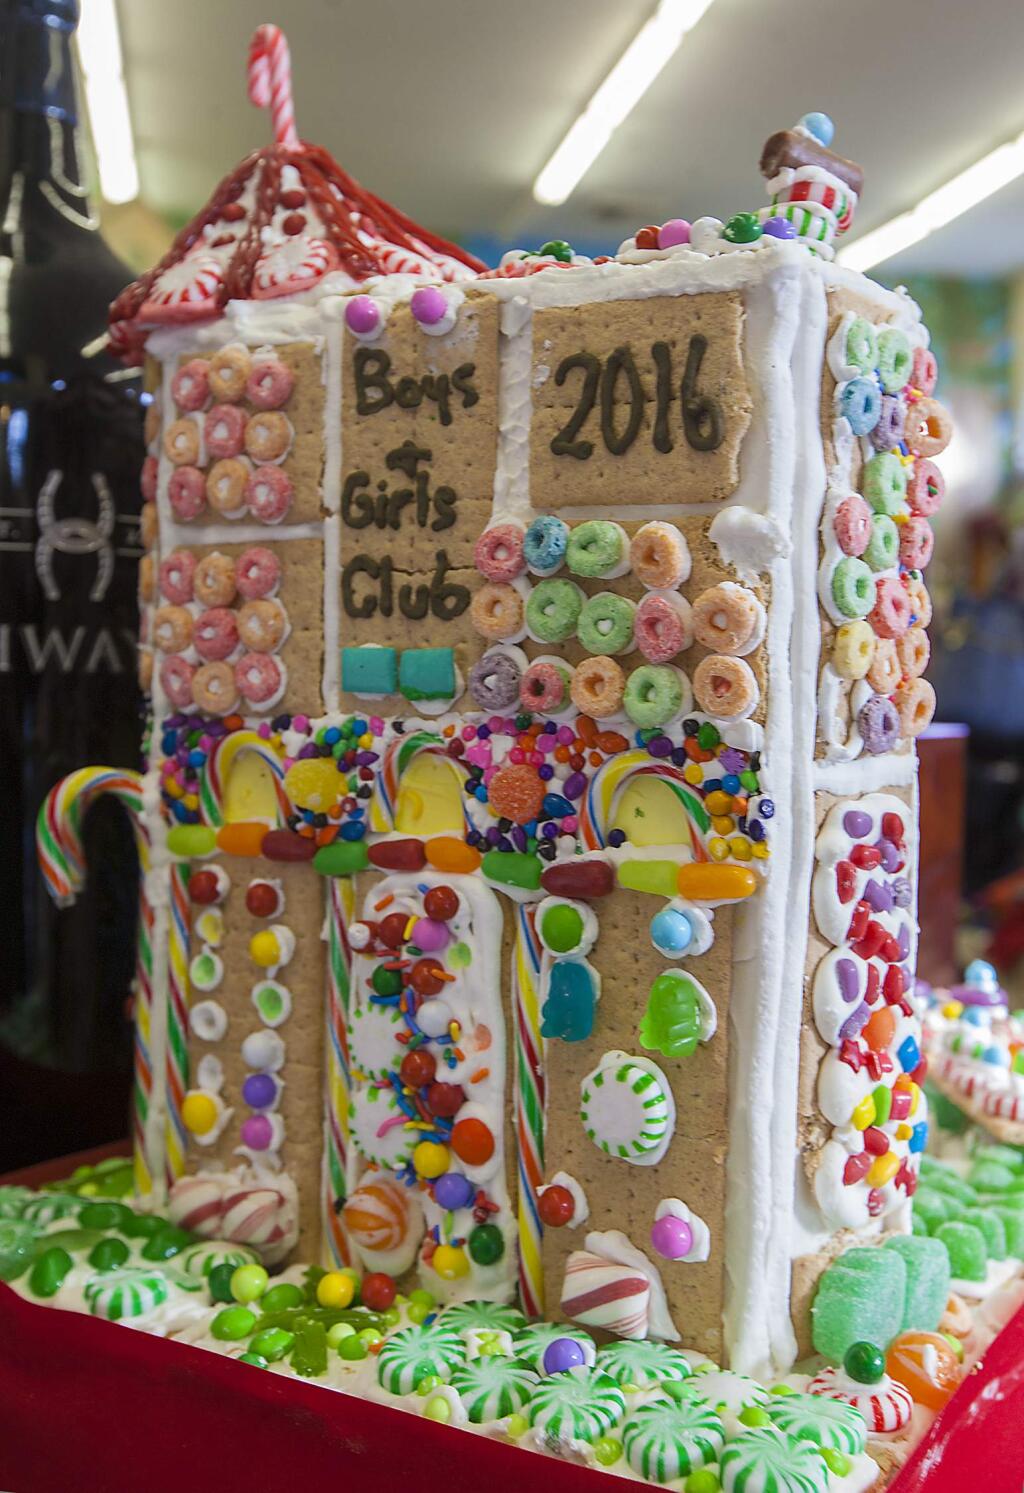 Highway 12 Vineyards & Winery submission honors the Boys and Girls Clubs of Sonoma. Six wineries throughout the valley are competing for best gingerbread creation. Displayed in each of their tasting rooms, guests are invited to vote for their favorites. (Photo by Robbi Pengelly/Index-Tribune)